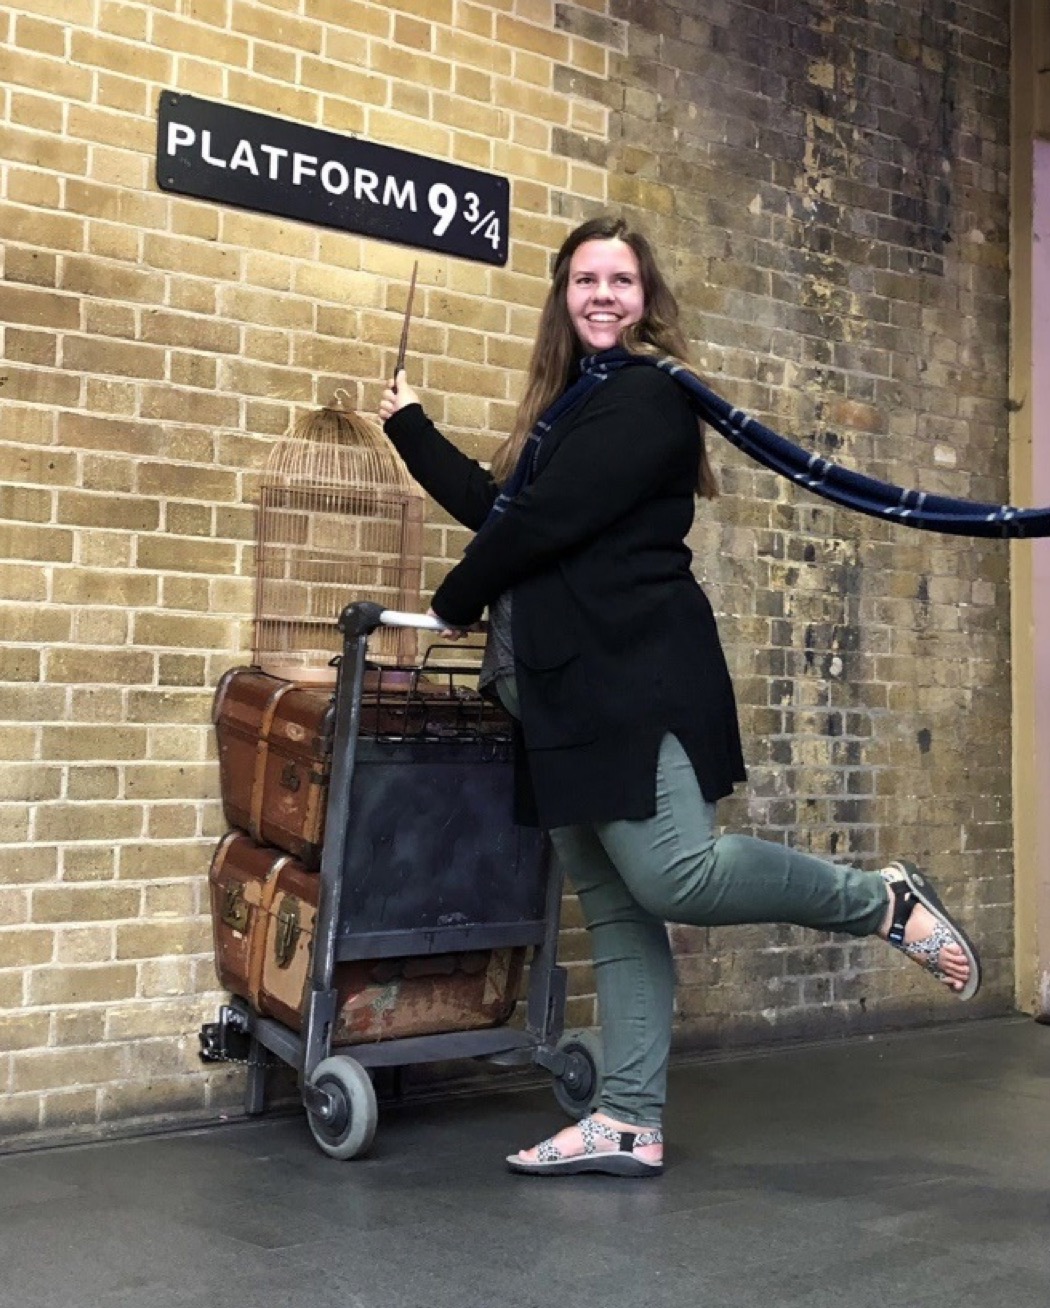 aifs abroad student at harry potter platform 9 and 3/4 at king's cross station